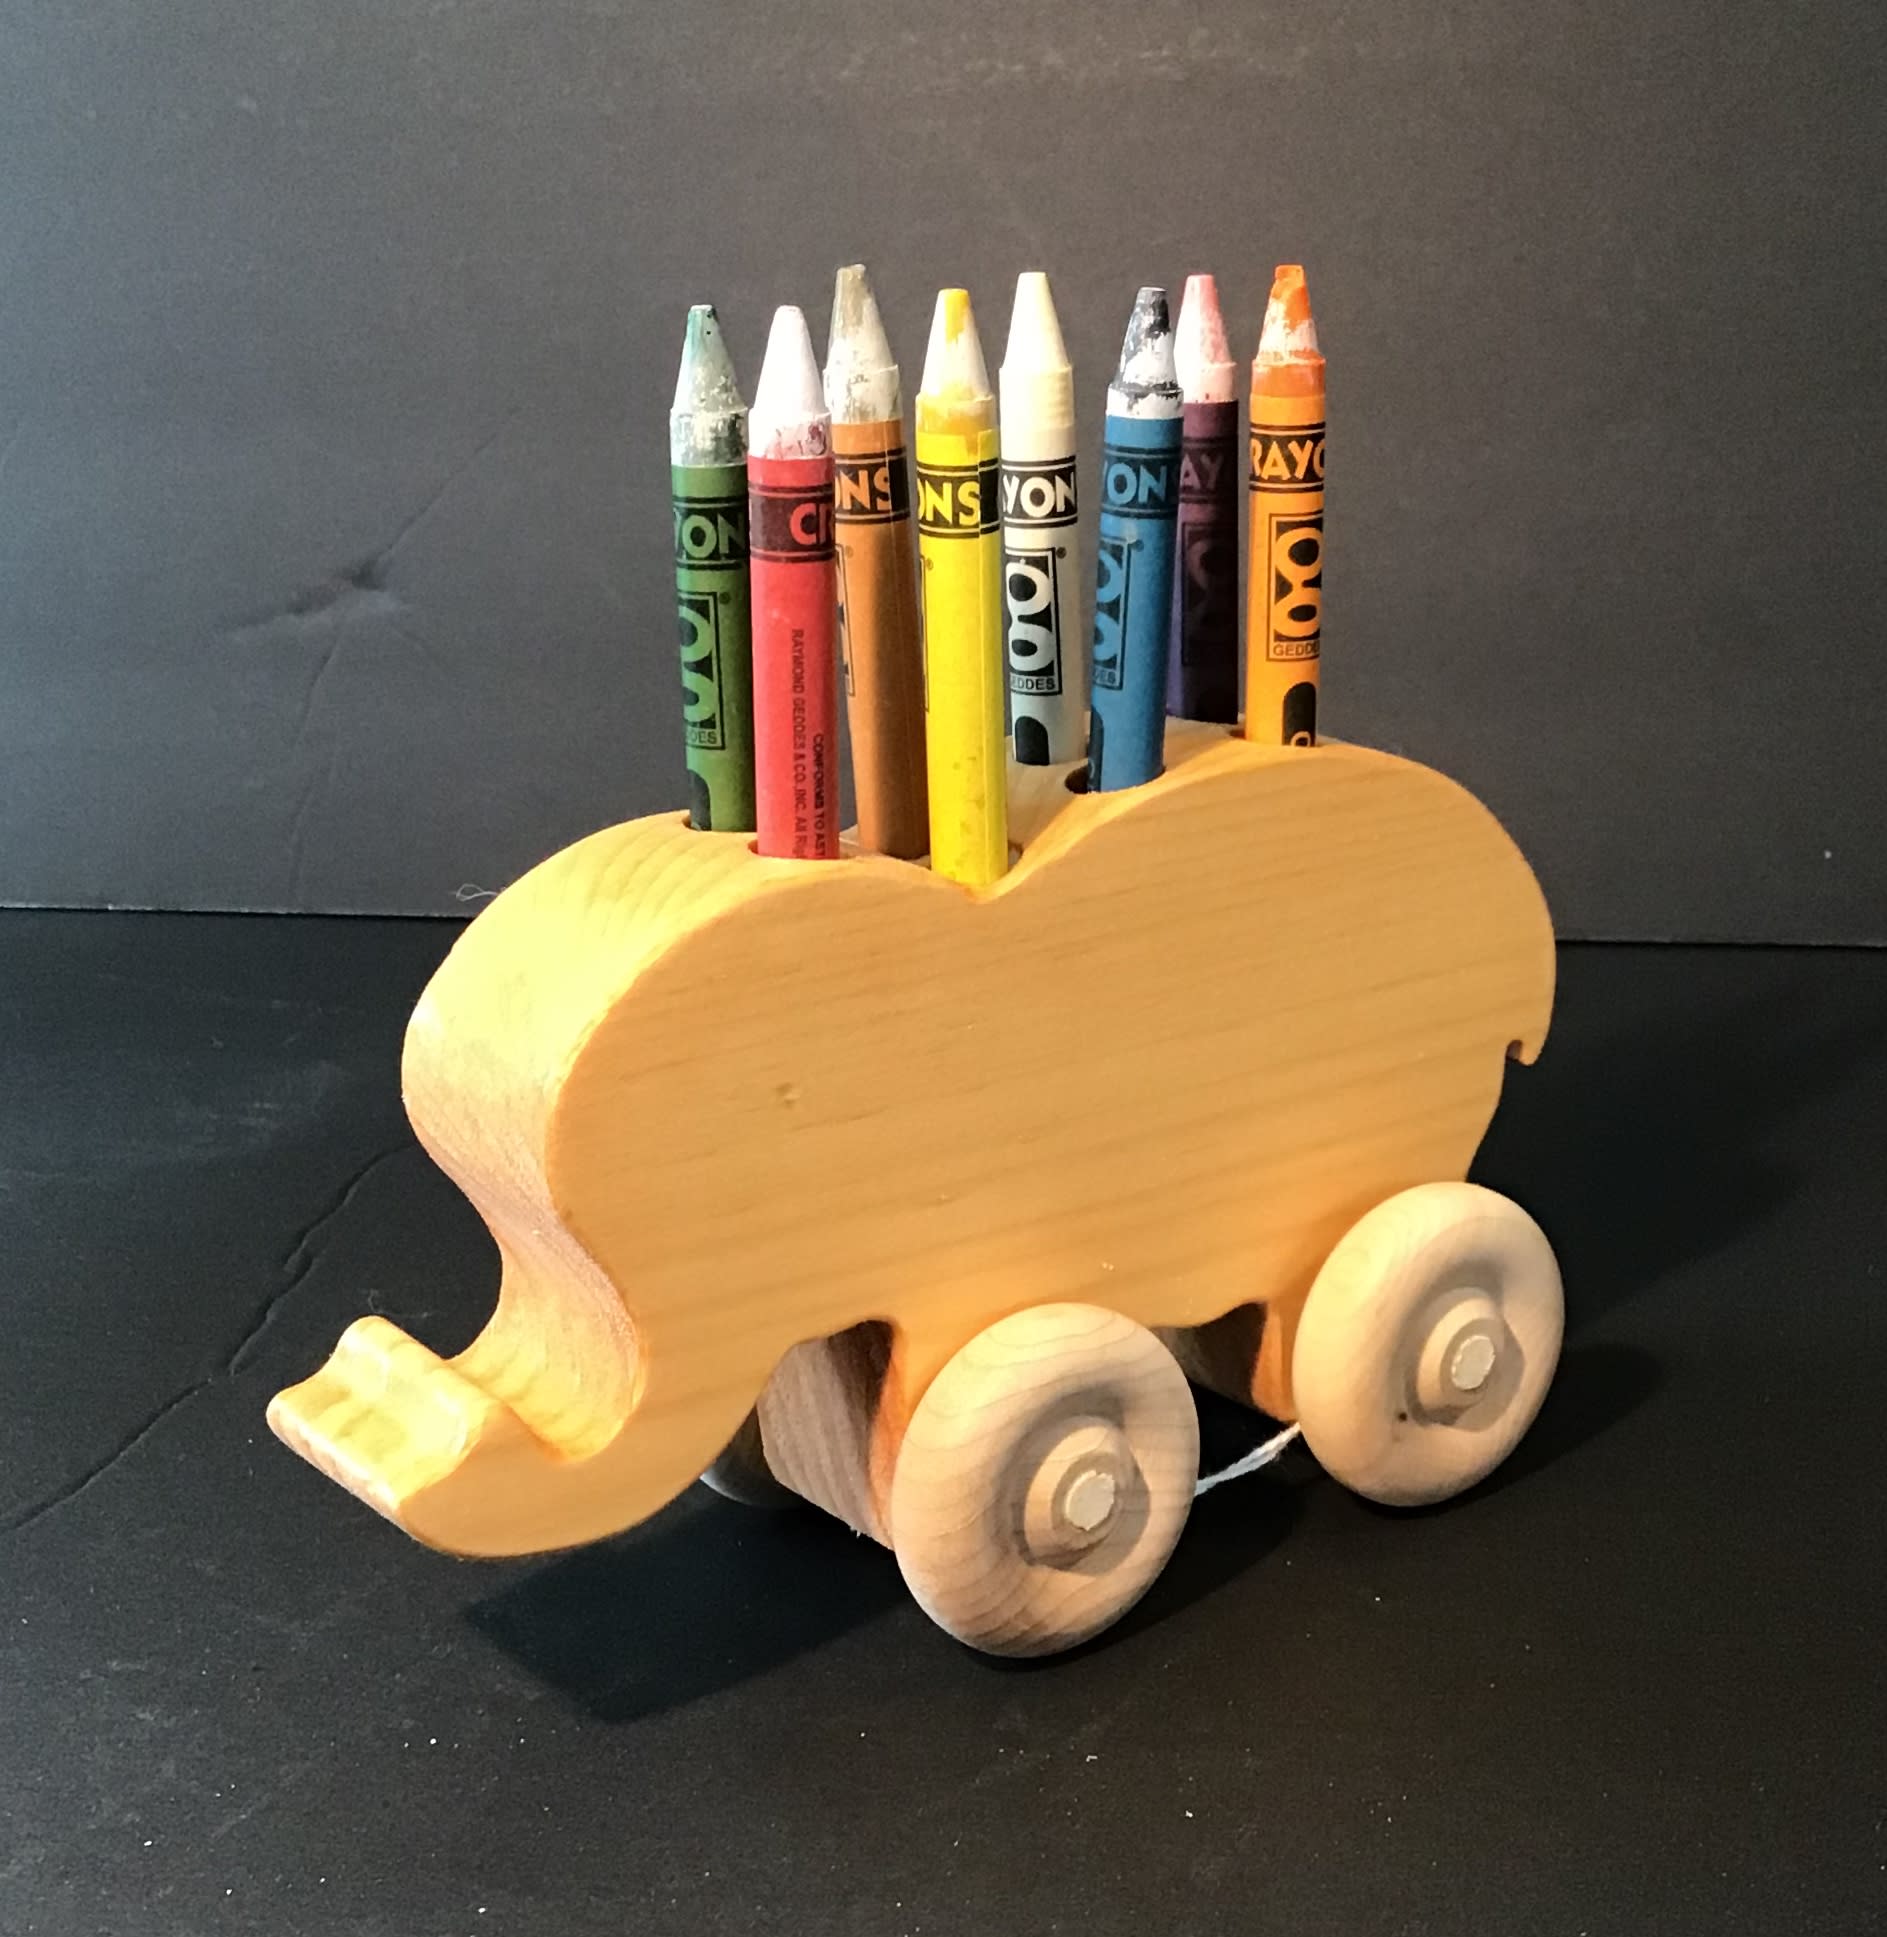 Elephant crayon holder - Toys- crayon holders - Barretts' Unique Wooden  Gifts, Handmade Wooden Items